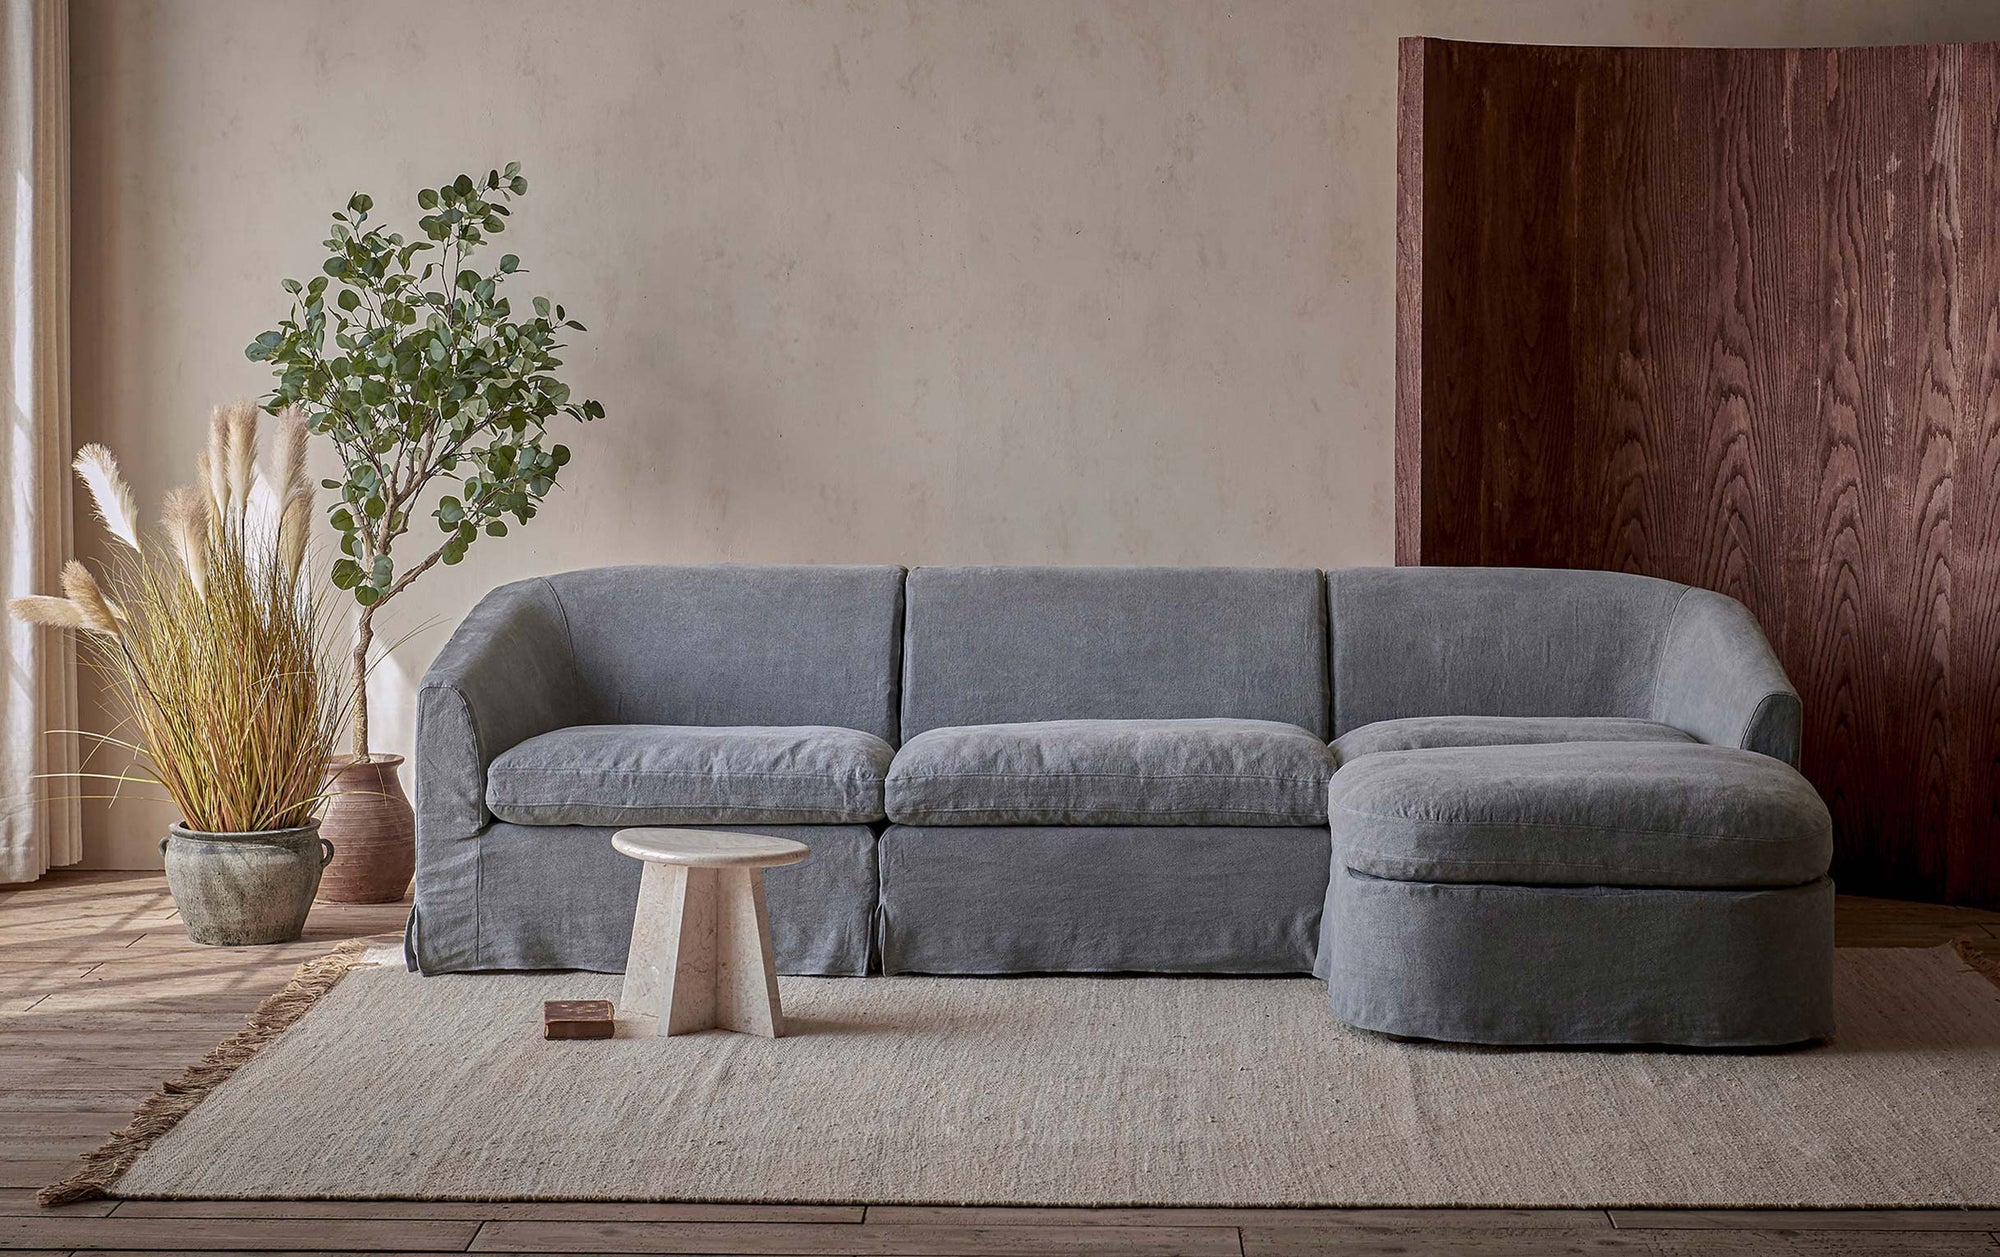 Ziki 4-piece Chaise Sectional Sofa in Ink Cap, a medium cool grey Light Weight Linen, placed in a room with plants and a stool